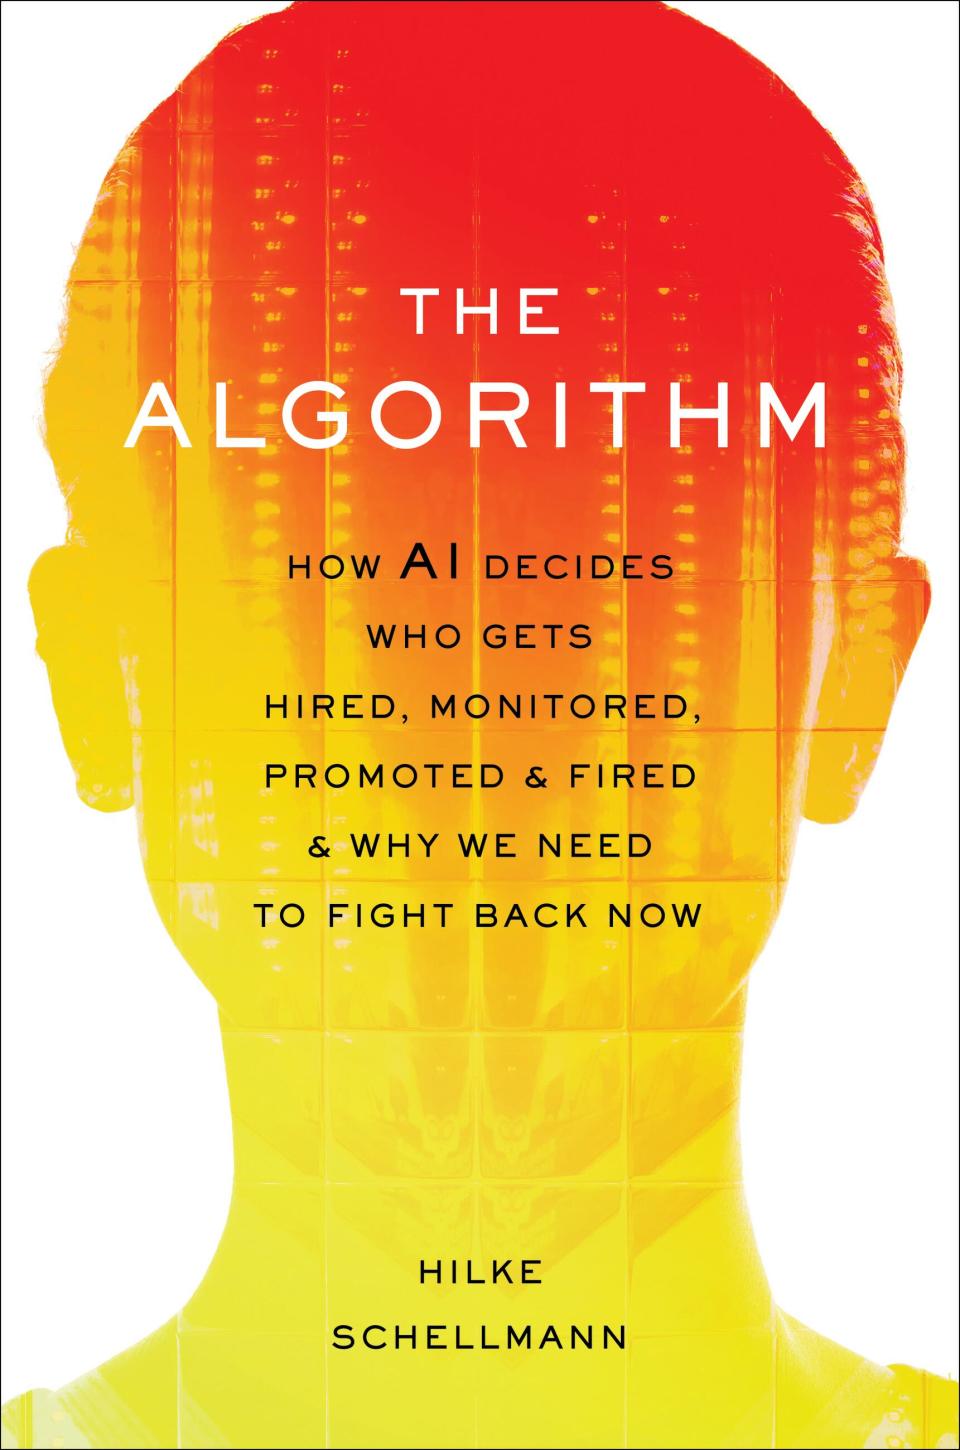 The cover of The Algorithm by Hilke Schellmann